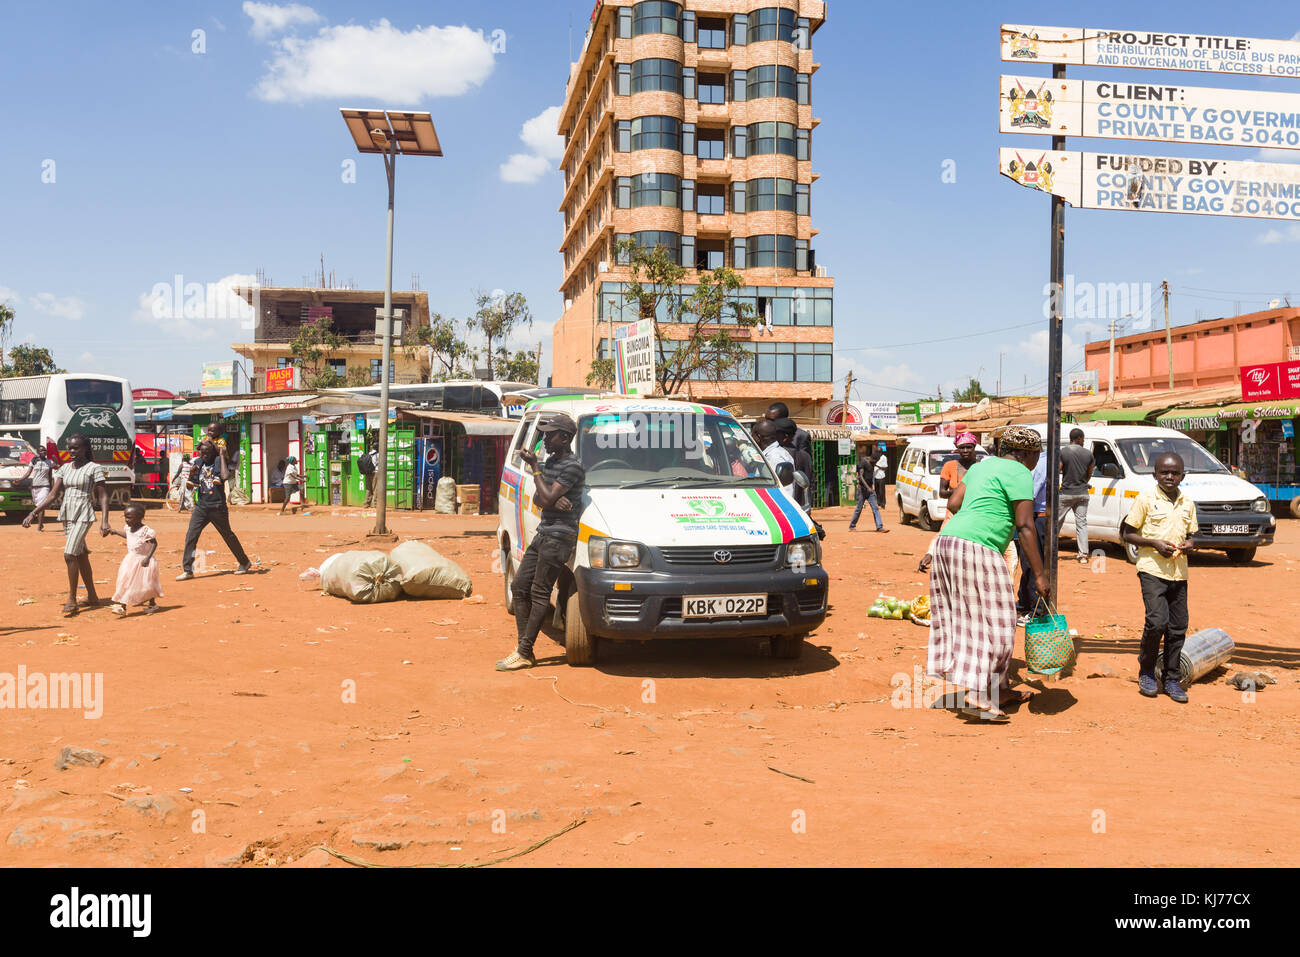 .An African man stands by a small minibus in the middle of a town with people walking past, Uganda, East Africa Stock Photo